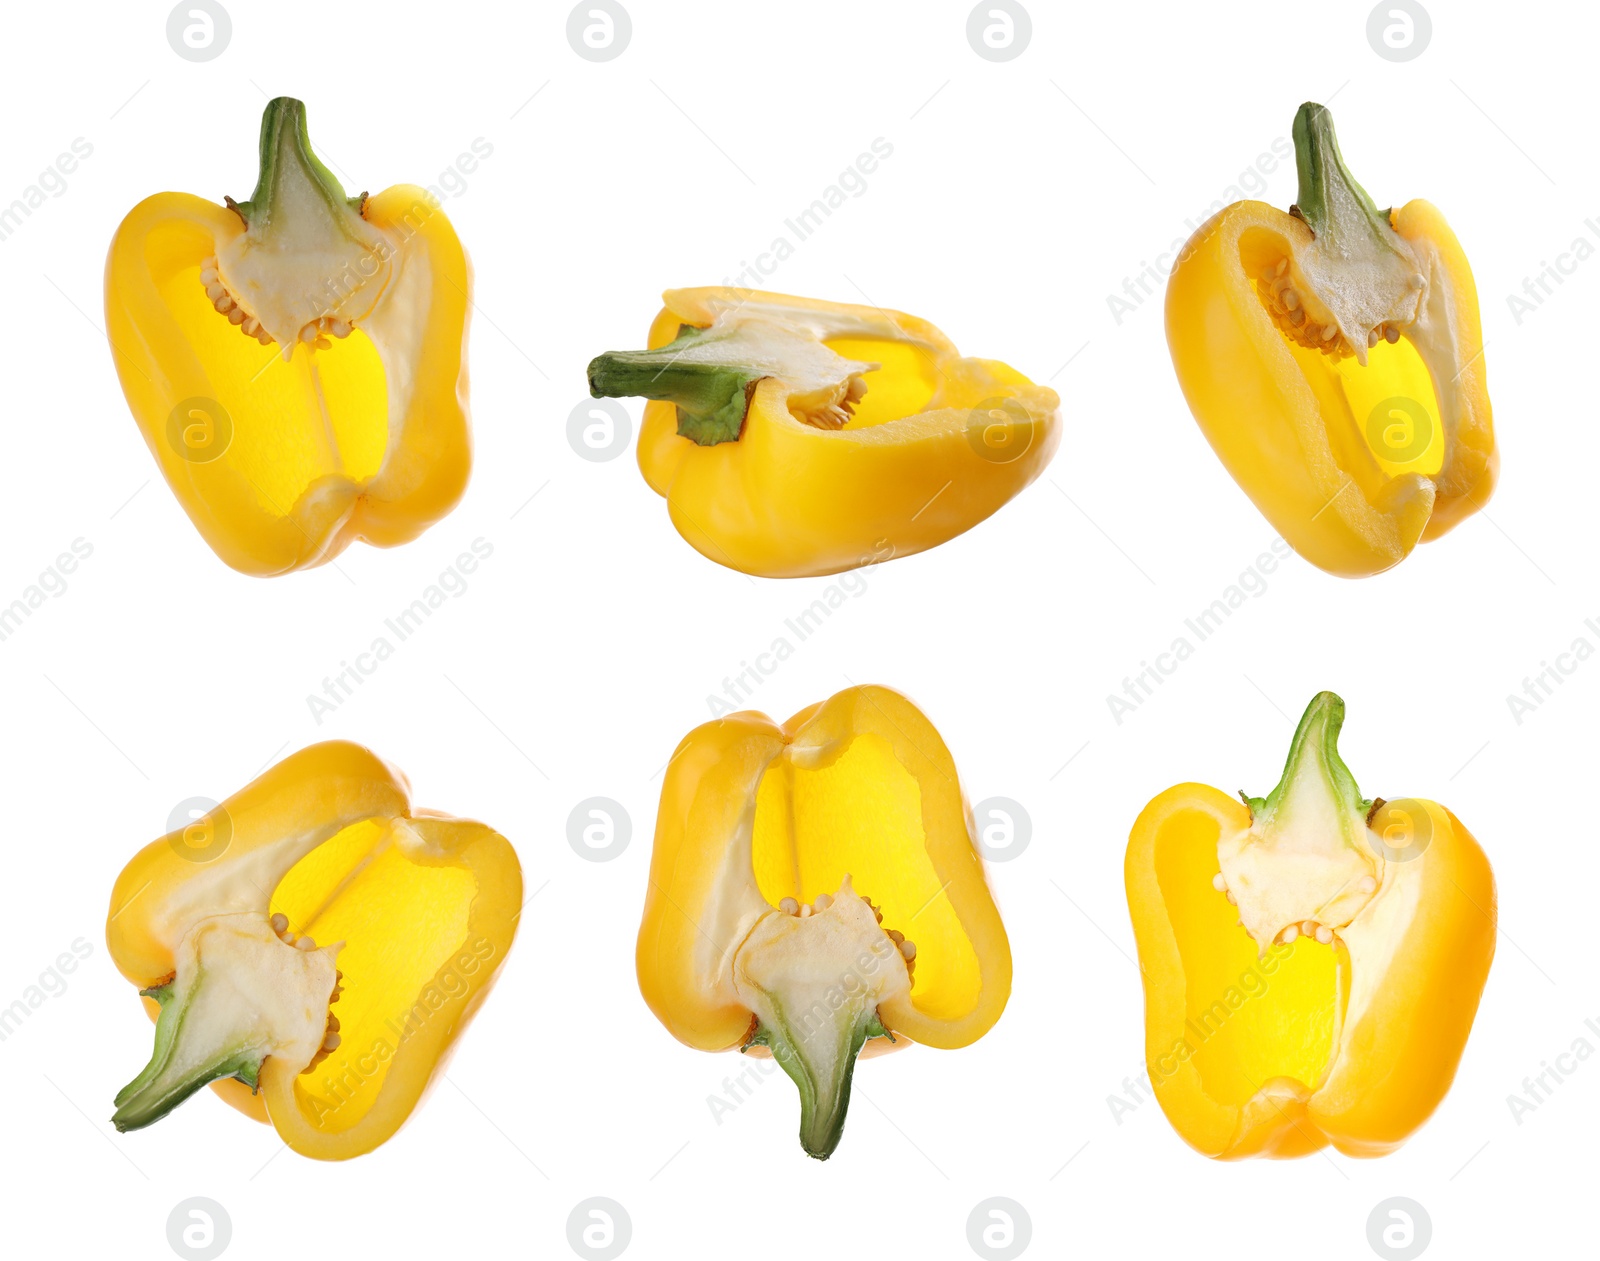 Image of Set of cut ripe yellow bell peppers on white background